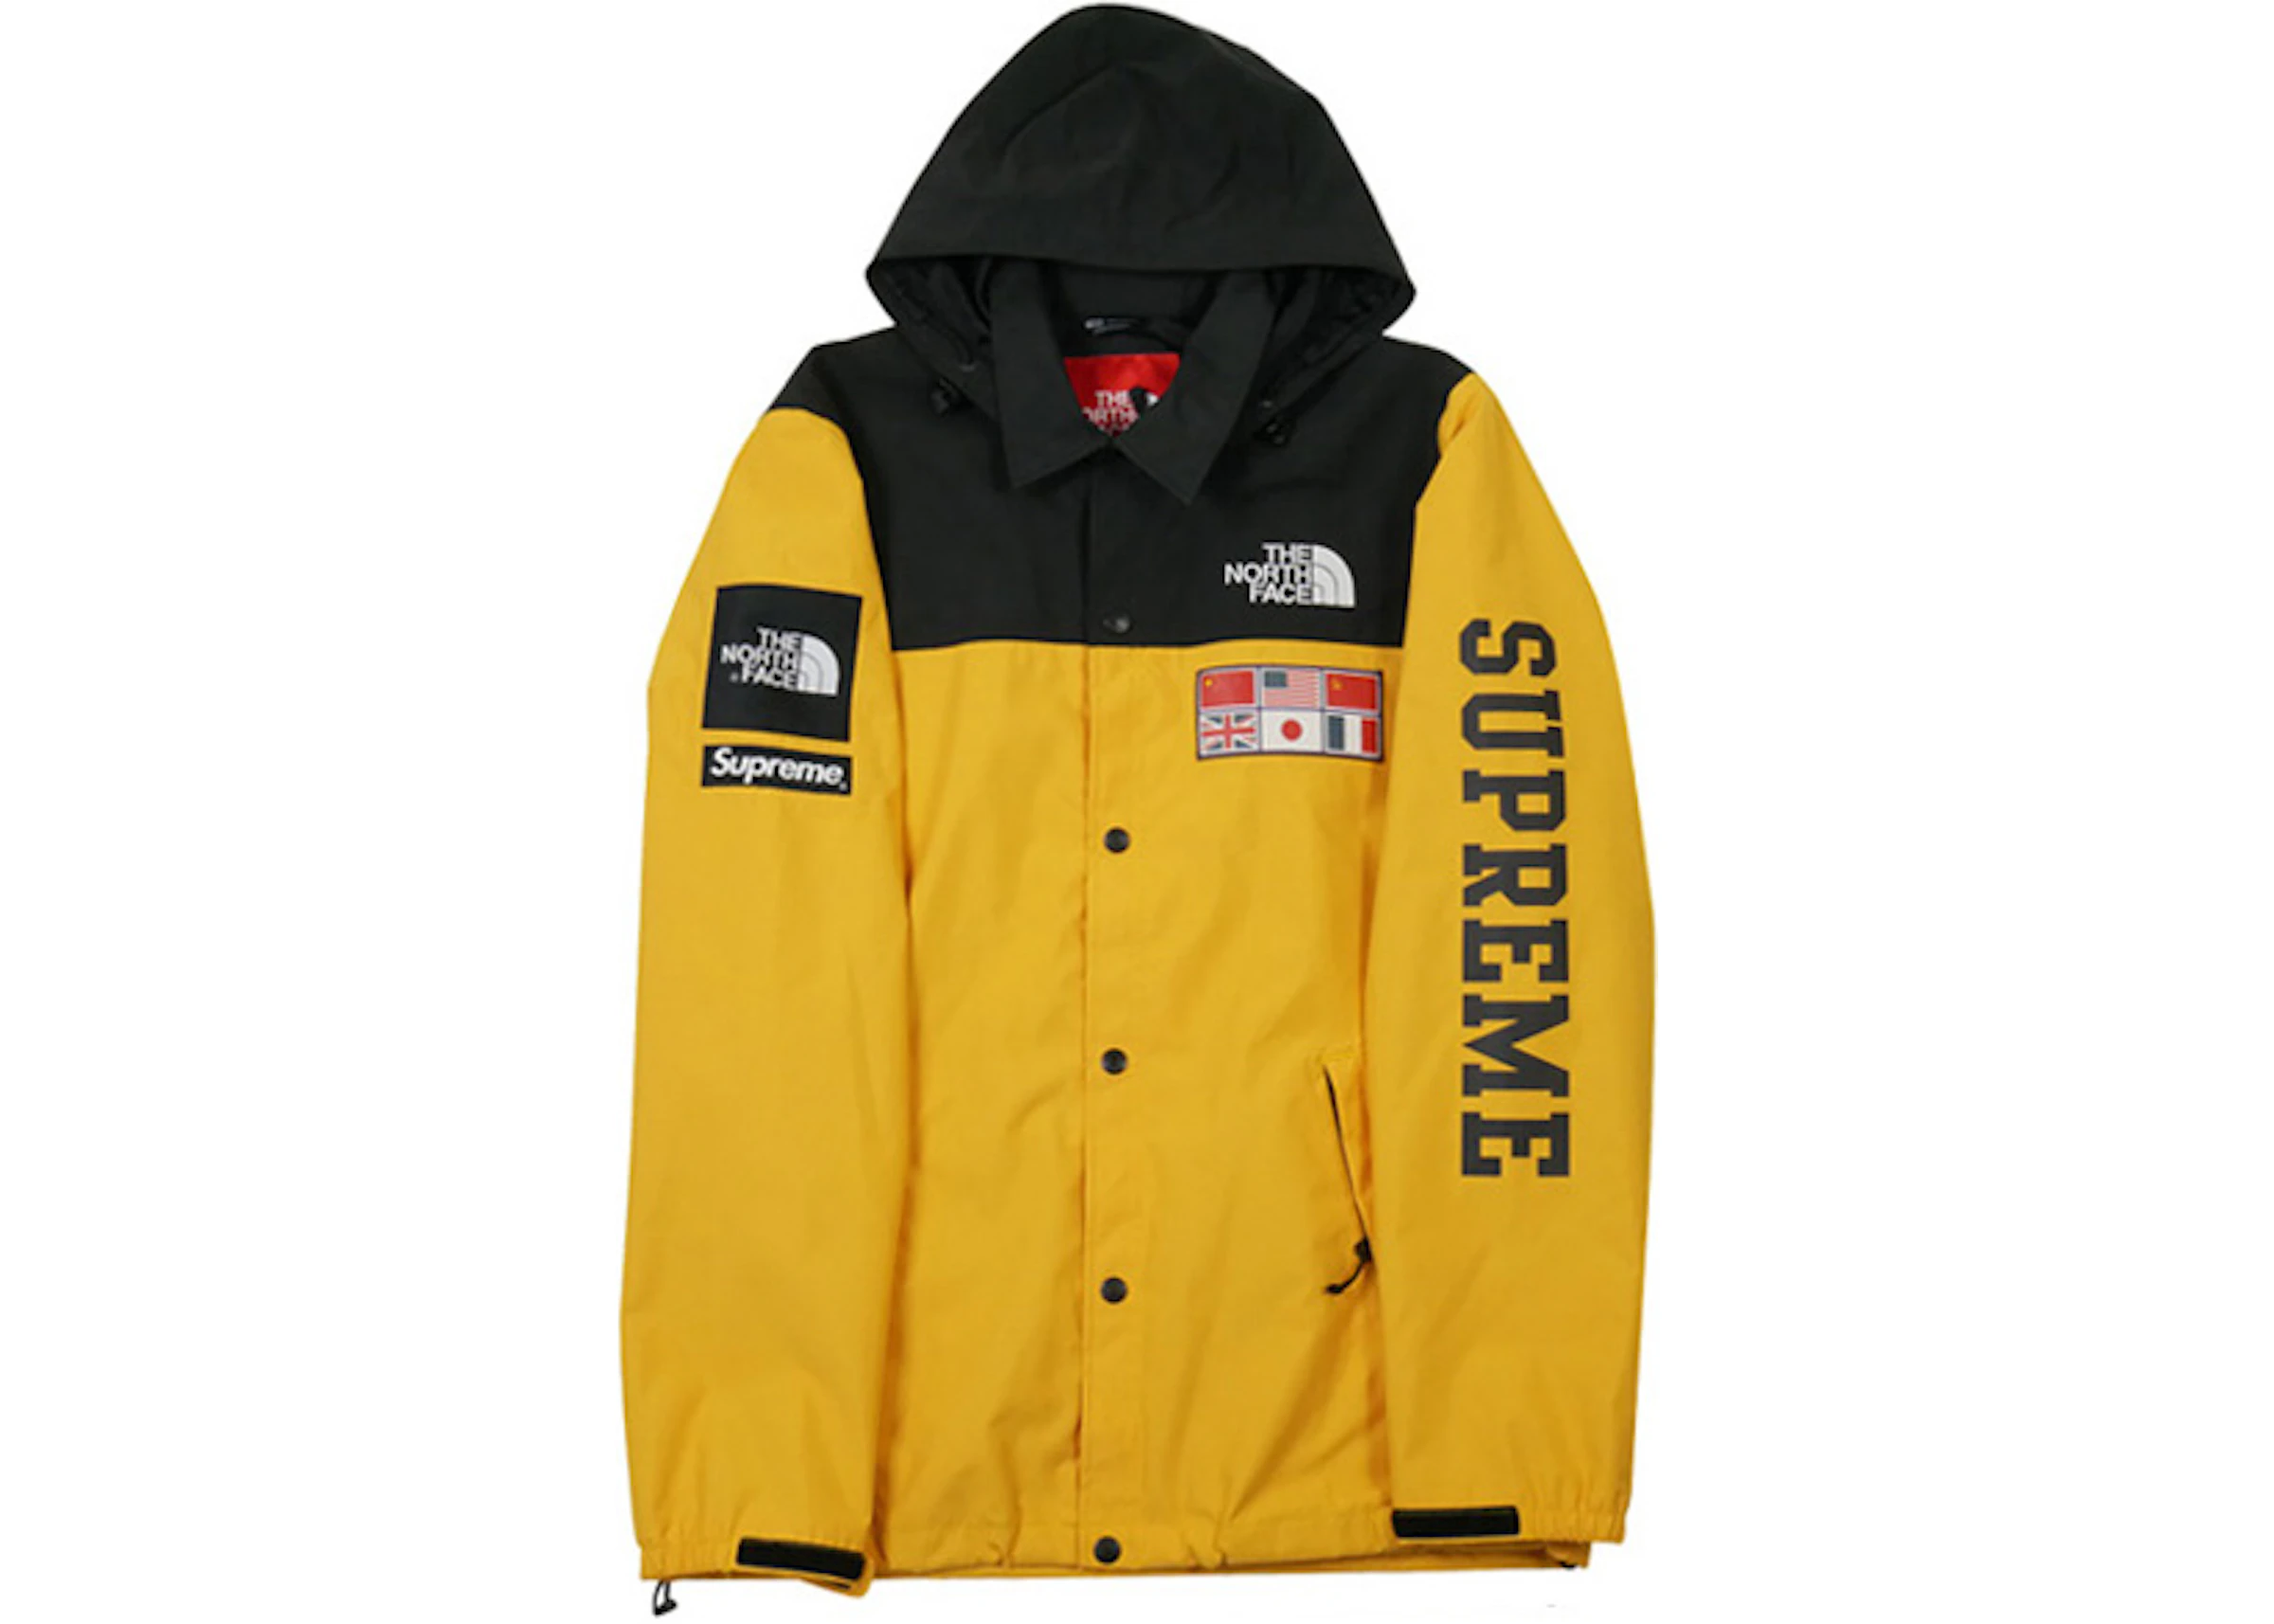 Zeeziekte criticus Clip vlinder Supreme The North Face Expedition Coaches Jacket Yellow - SS14 - US